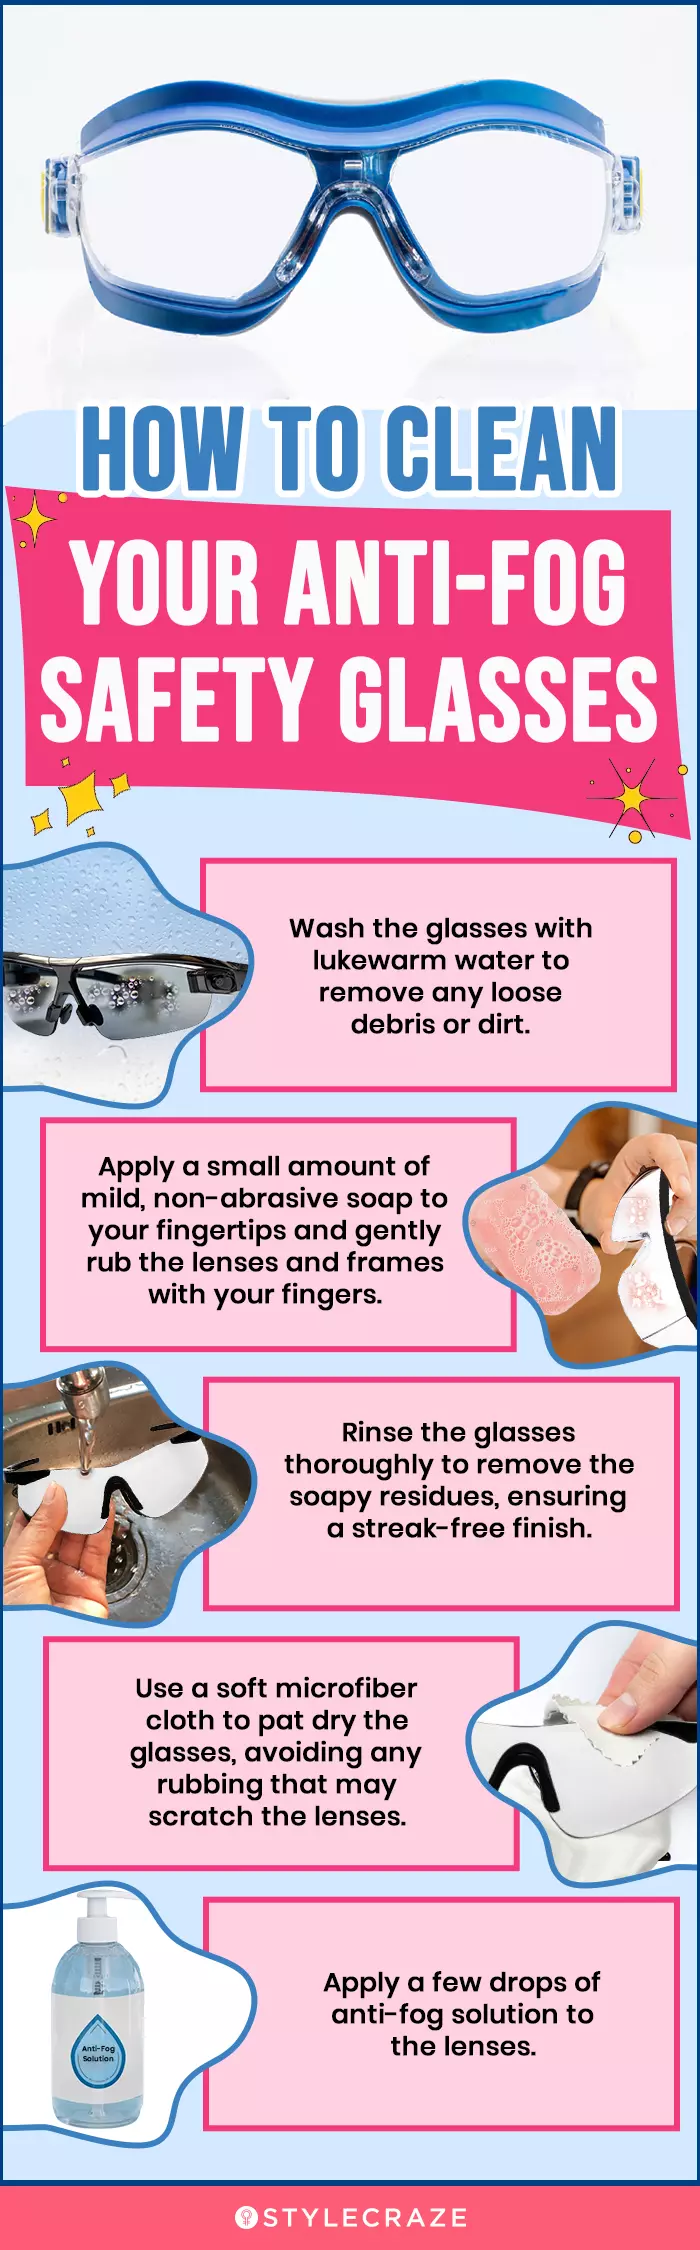 How To Clean Your Anti-Fog Safety Glasses (infographic)